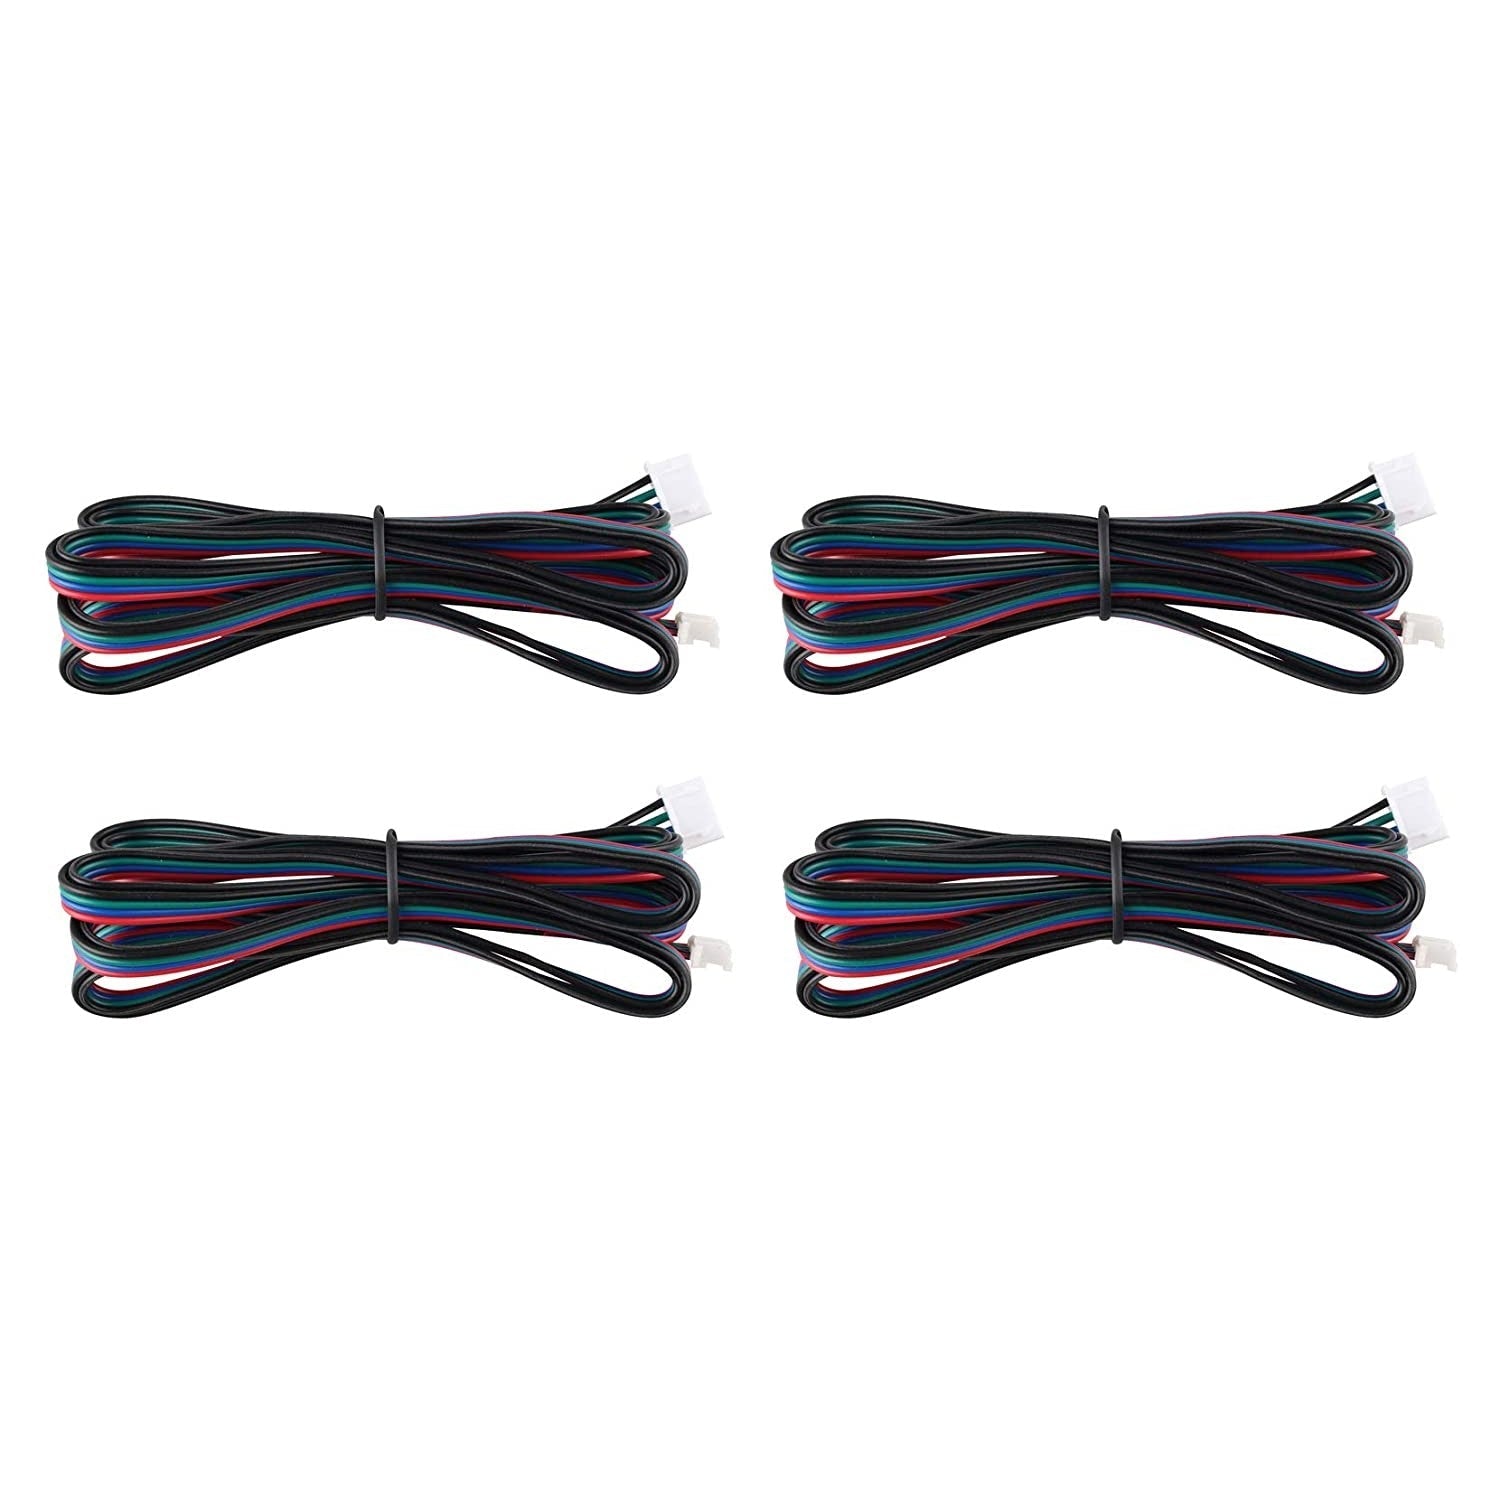 4pcs 2M Stepper Motor Cables 4Pin to XH2.0 6Pin White Terminal Parallel Motor Wires for 3D Printer Stepper Motor